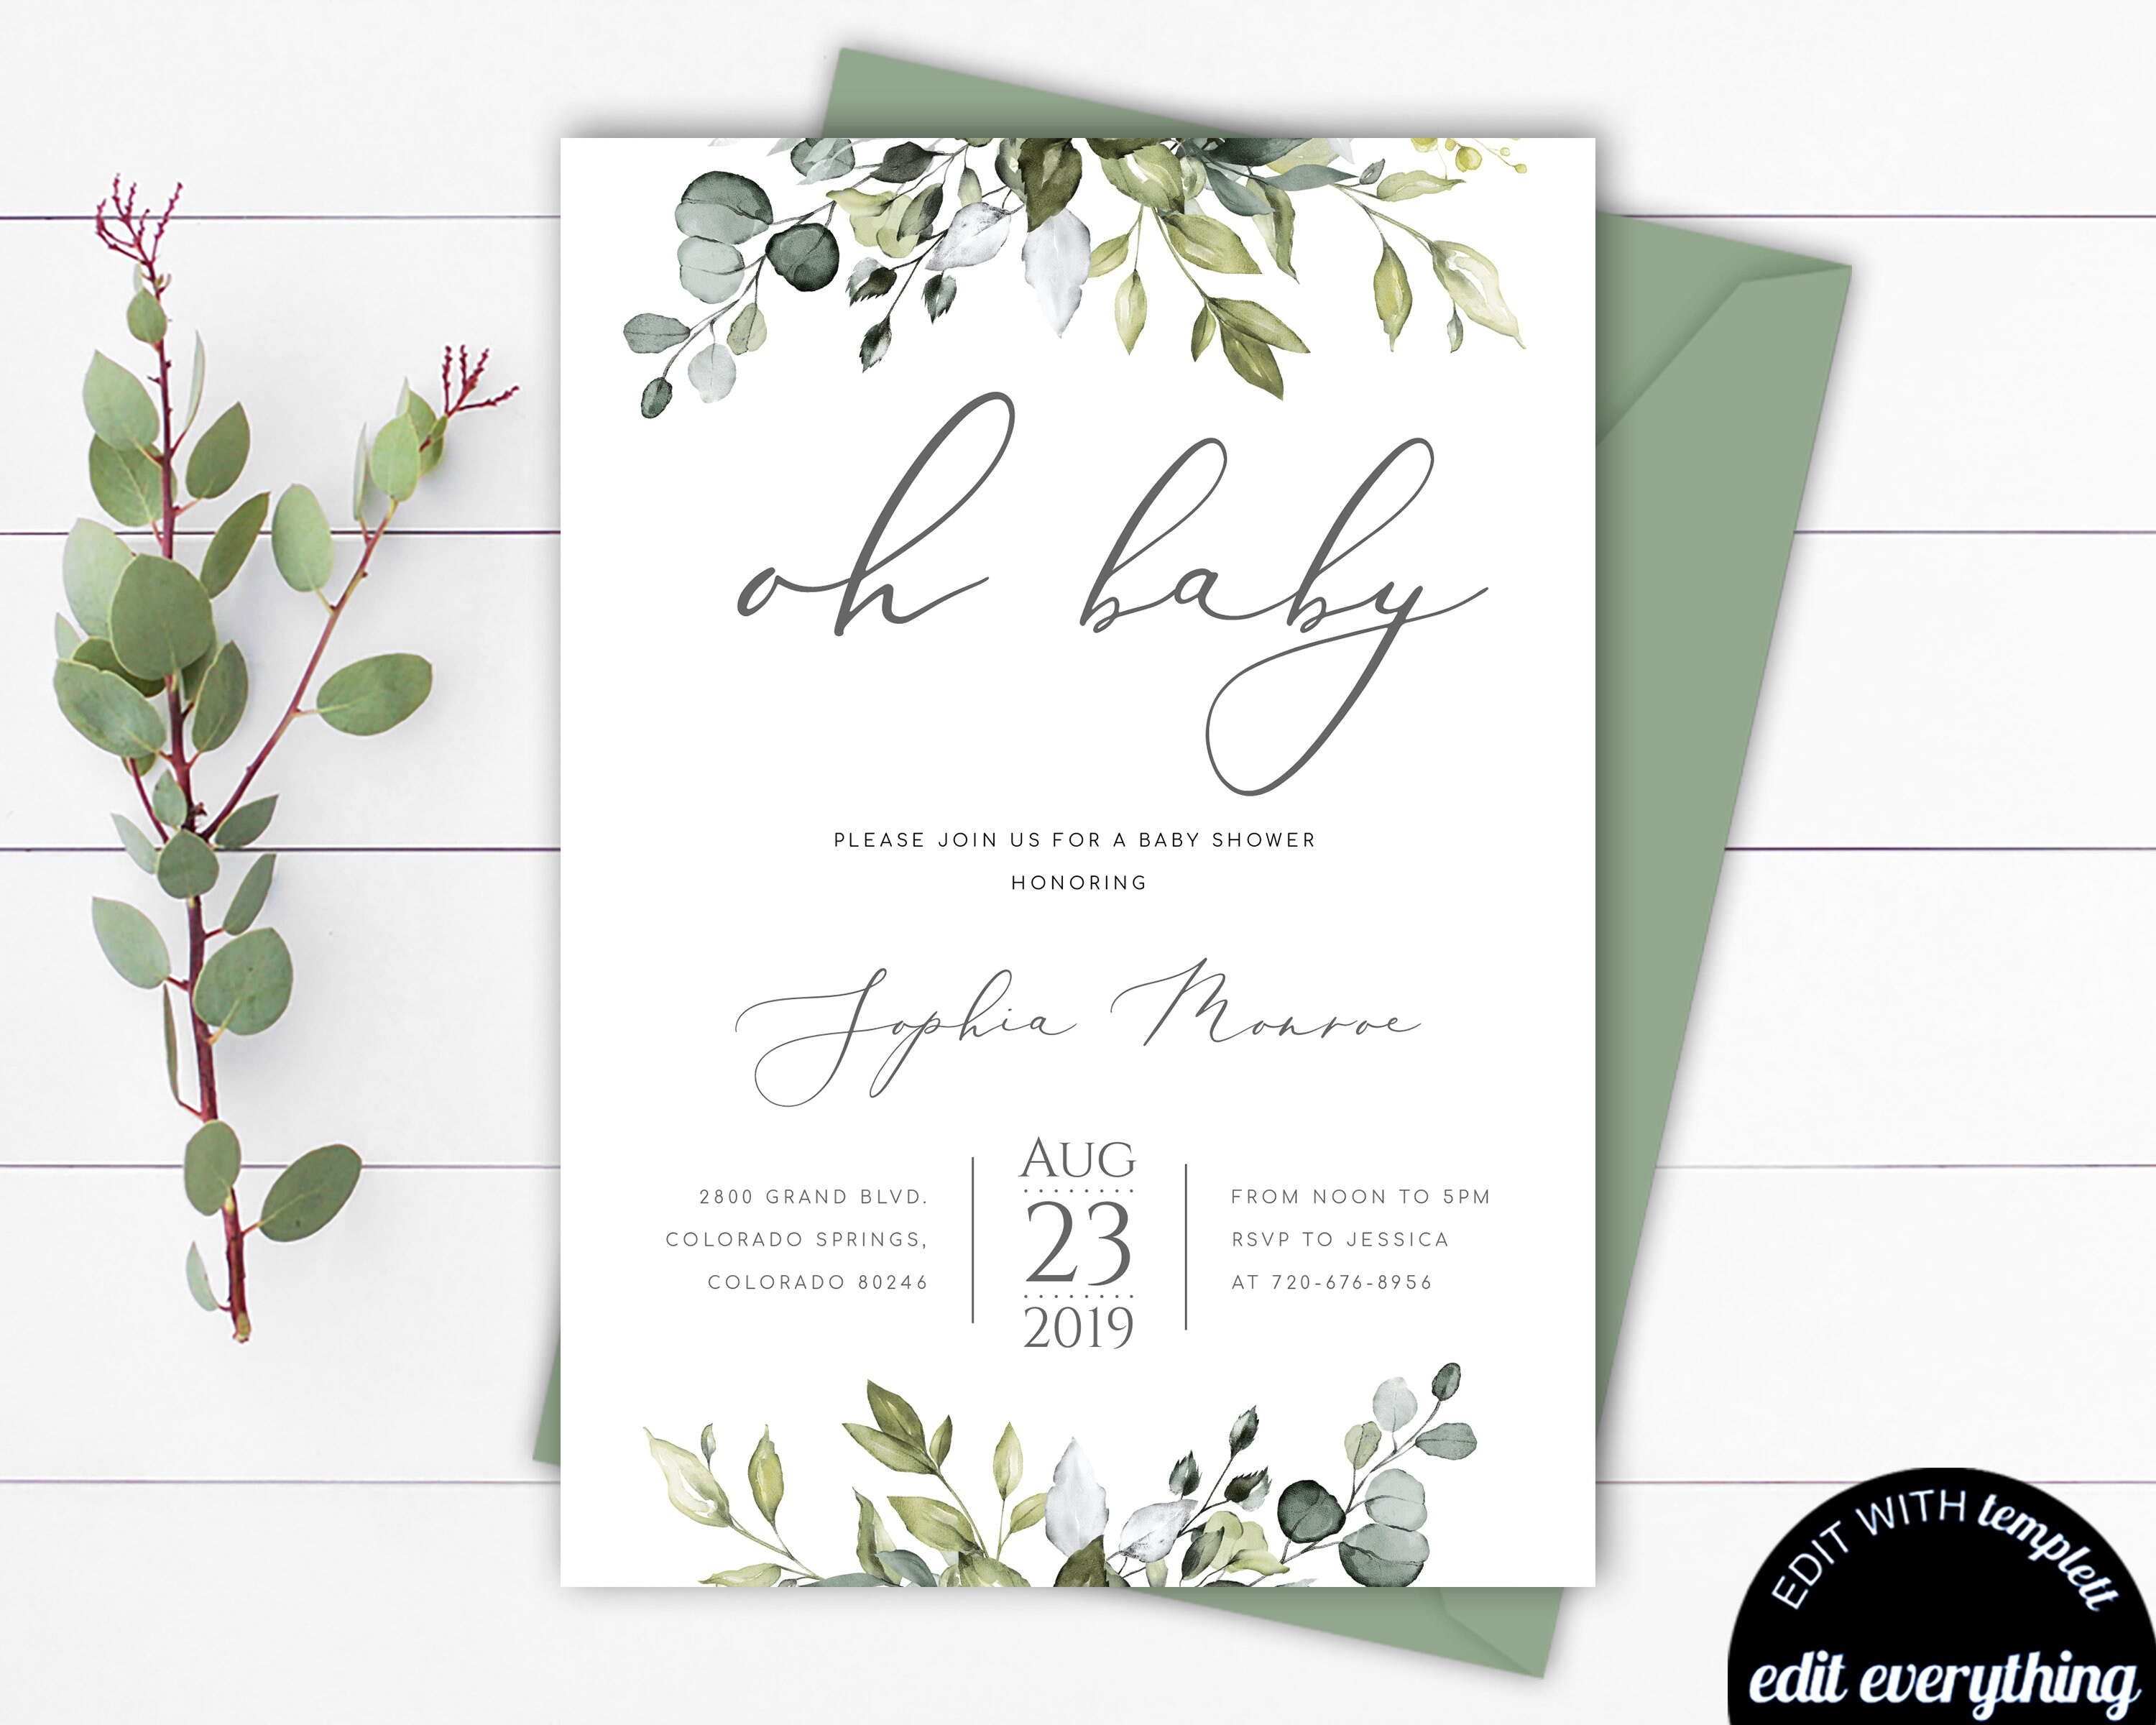 Thank You Card Greenery Baby Shower Invitation Kit Woodland Leaves Book for Baby Insert Diaper Raffle N12 Neutral Eucalyptus Vintage Set